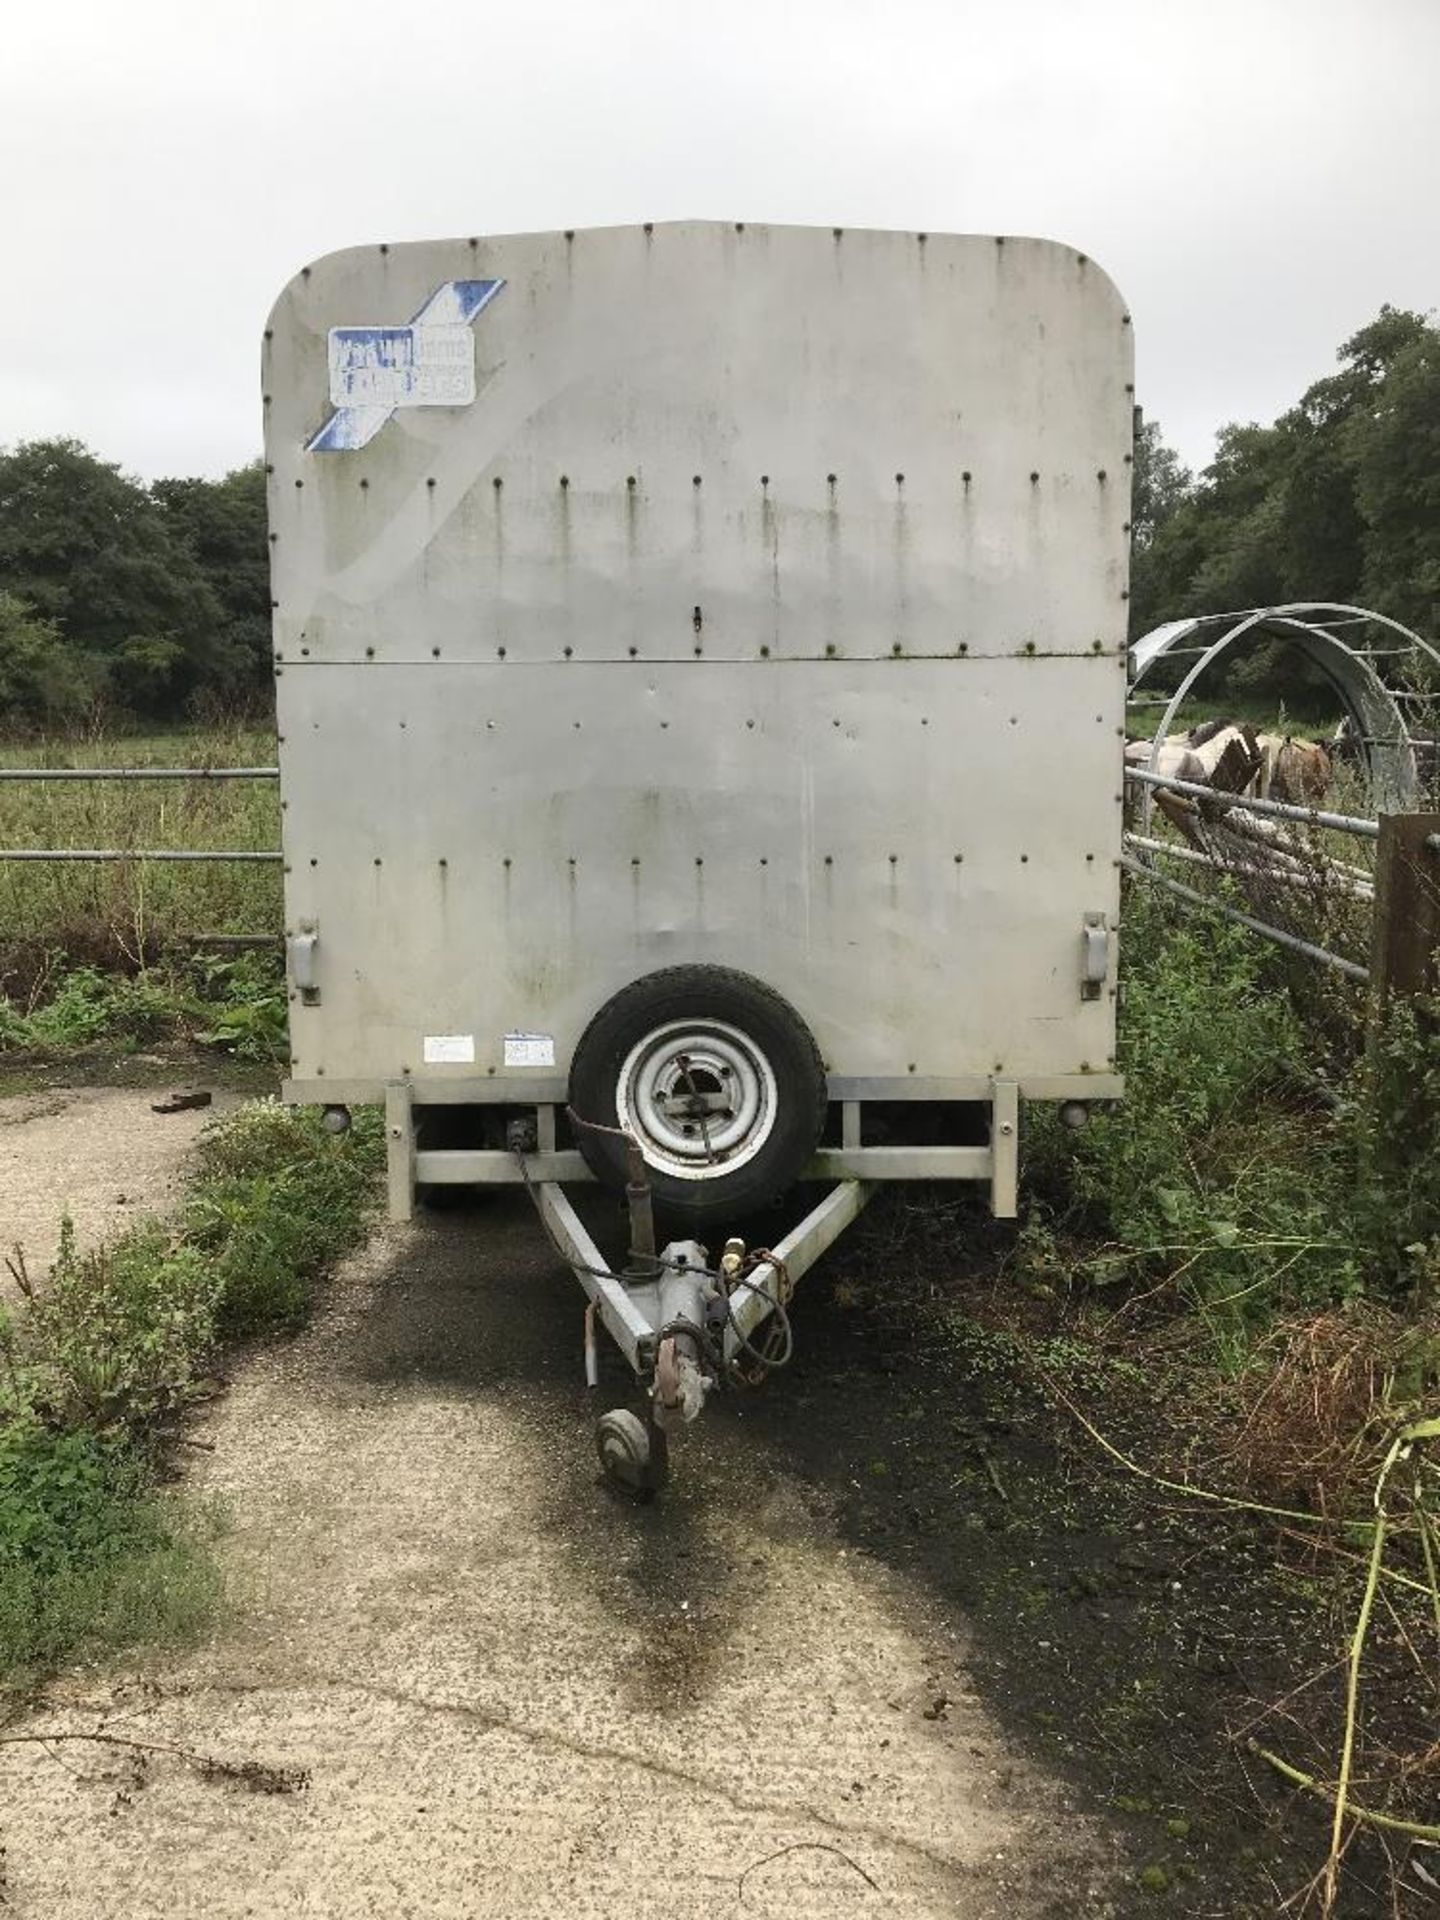 Ifor Williams 12ft x 6ft livestock trailer in very good condition. Stored near Kirby Cane, Bungay. - Image 2 of 6